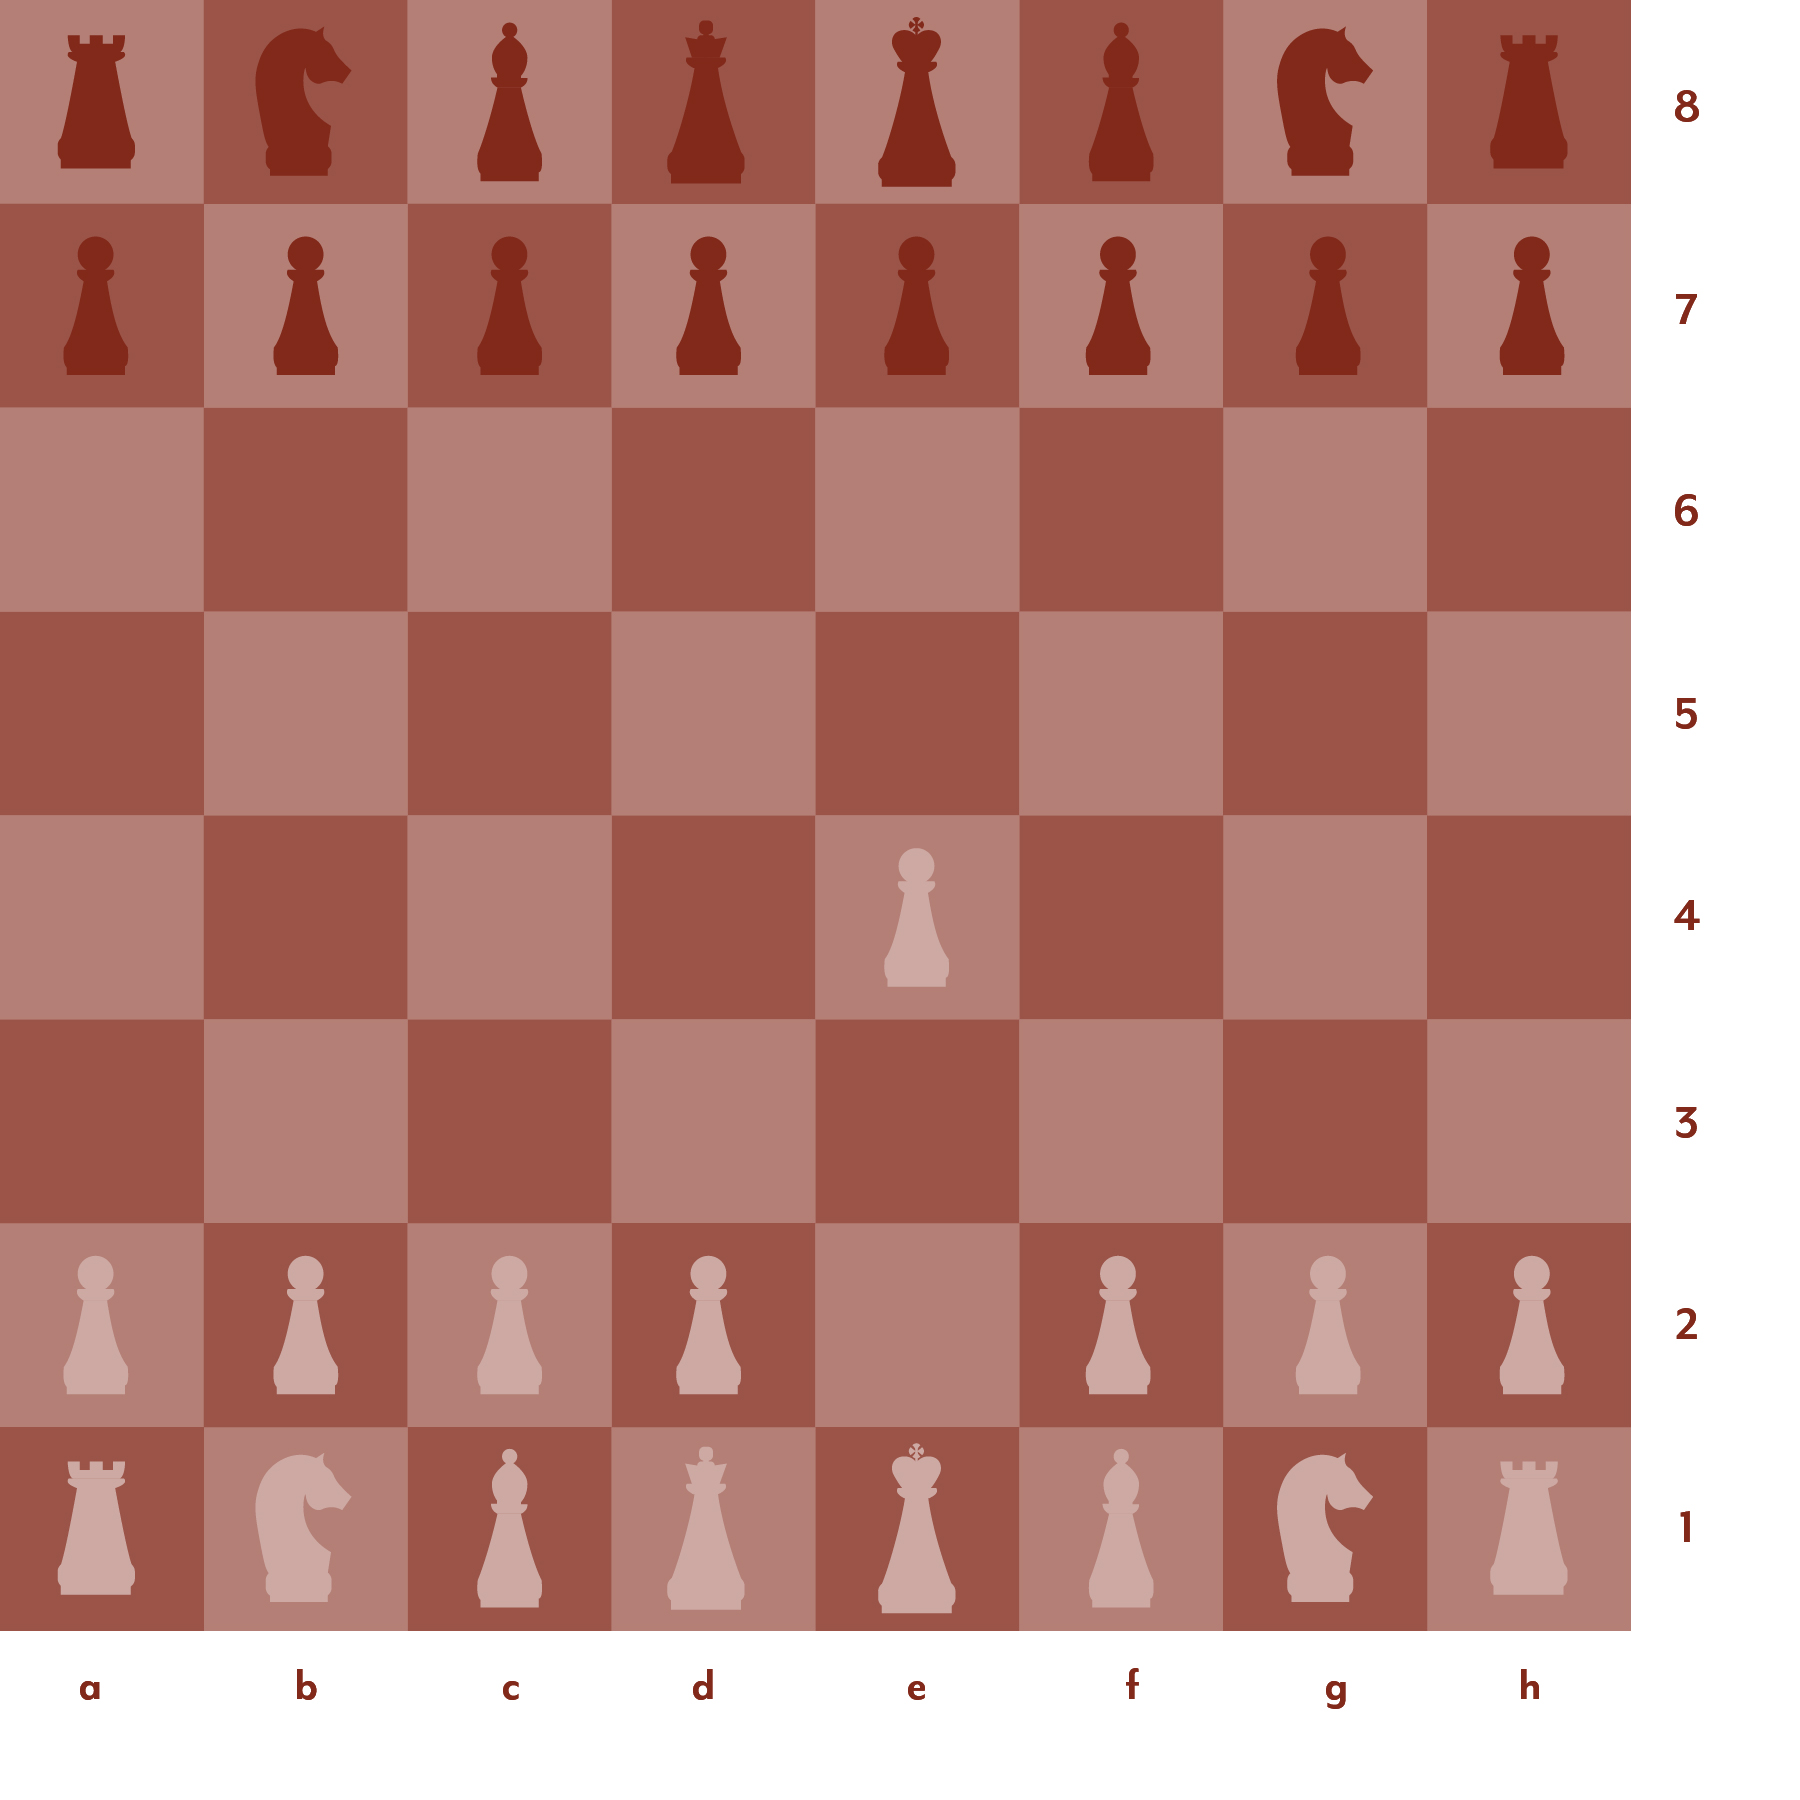 ▷ Best chess opening: Know how to win easily with 3 openings.